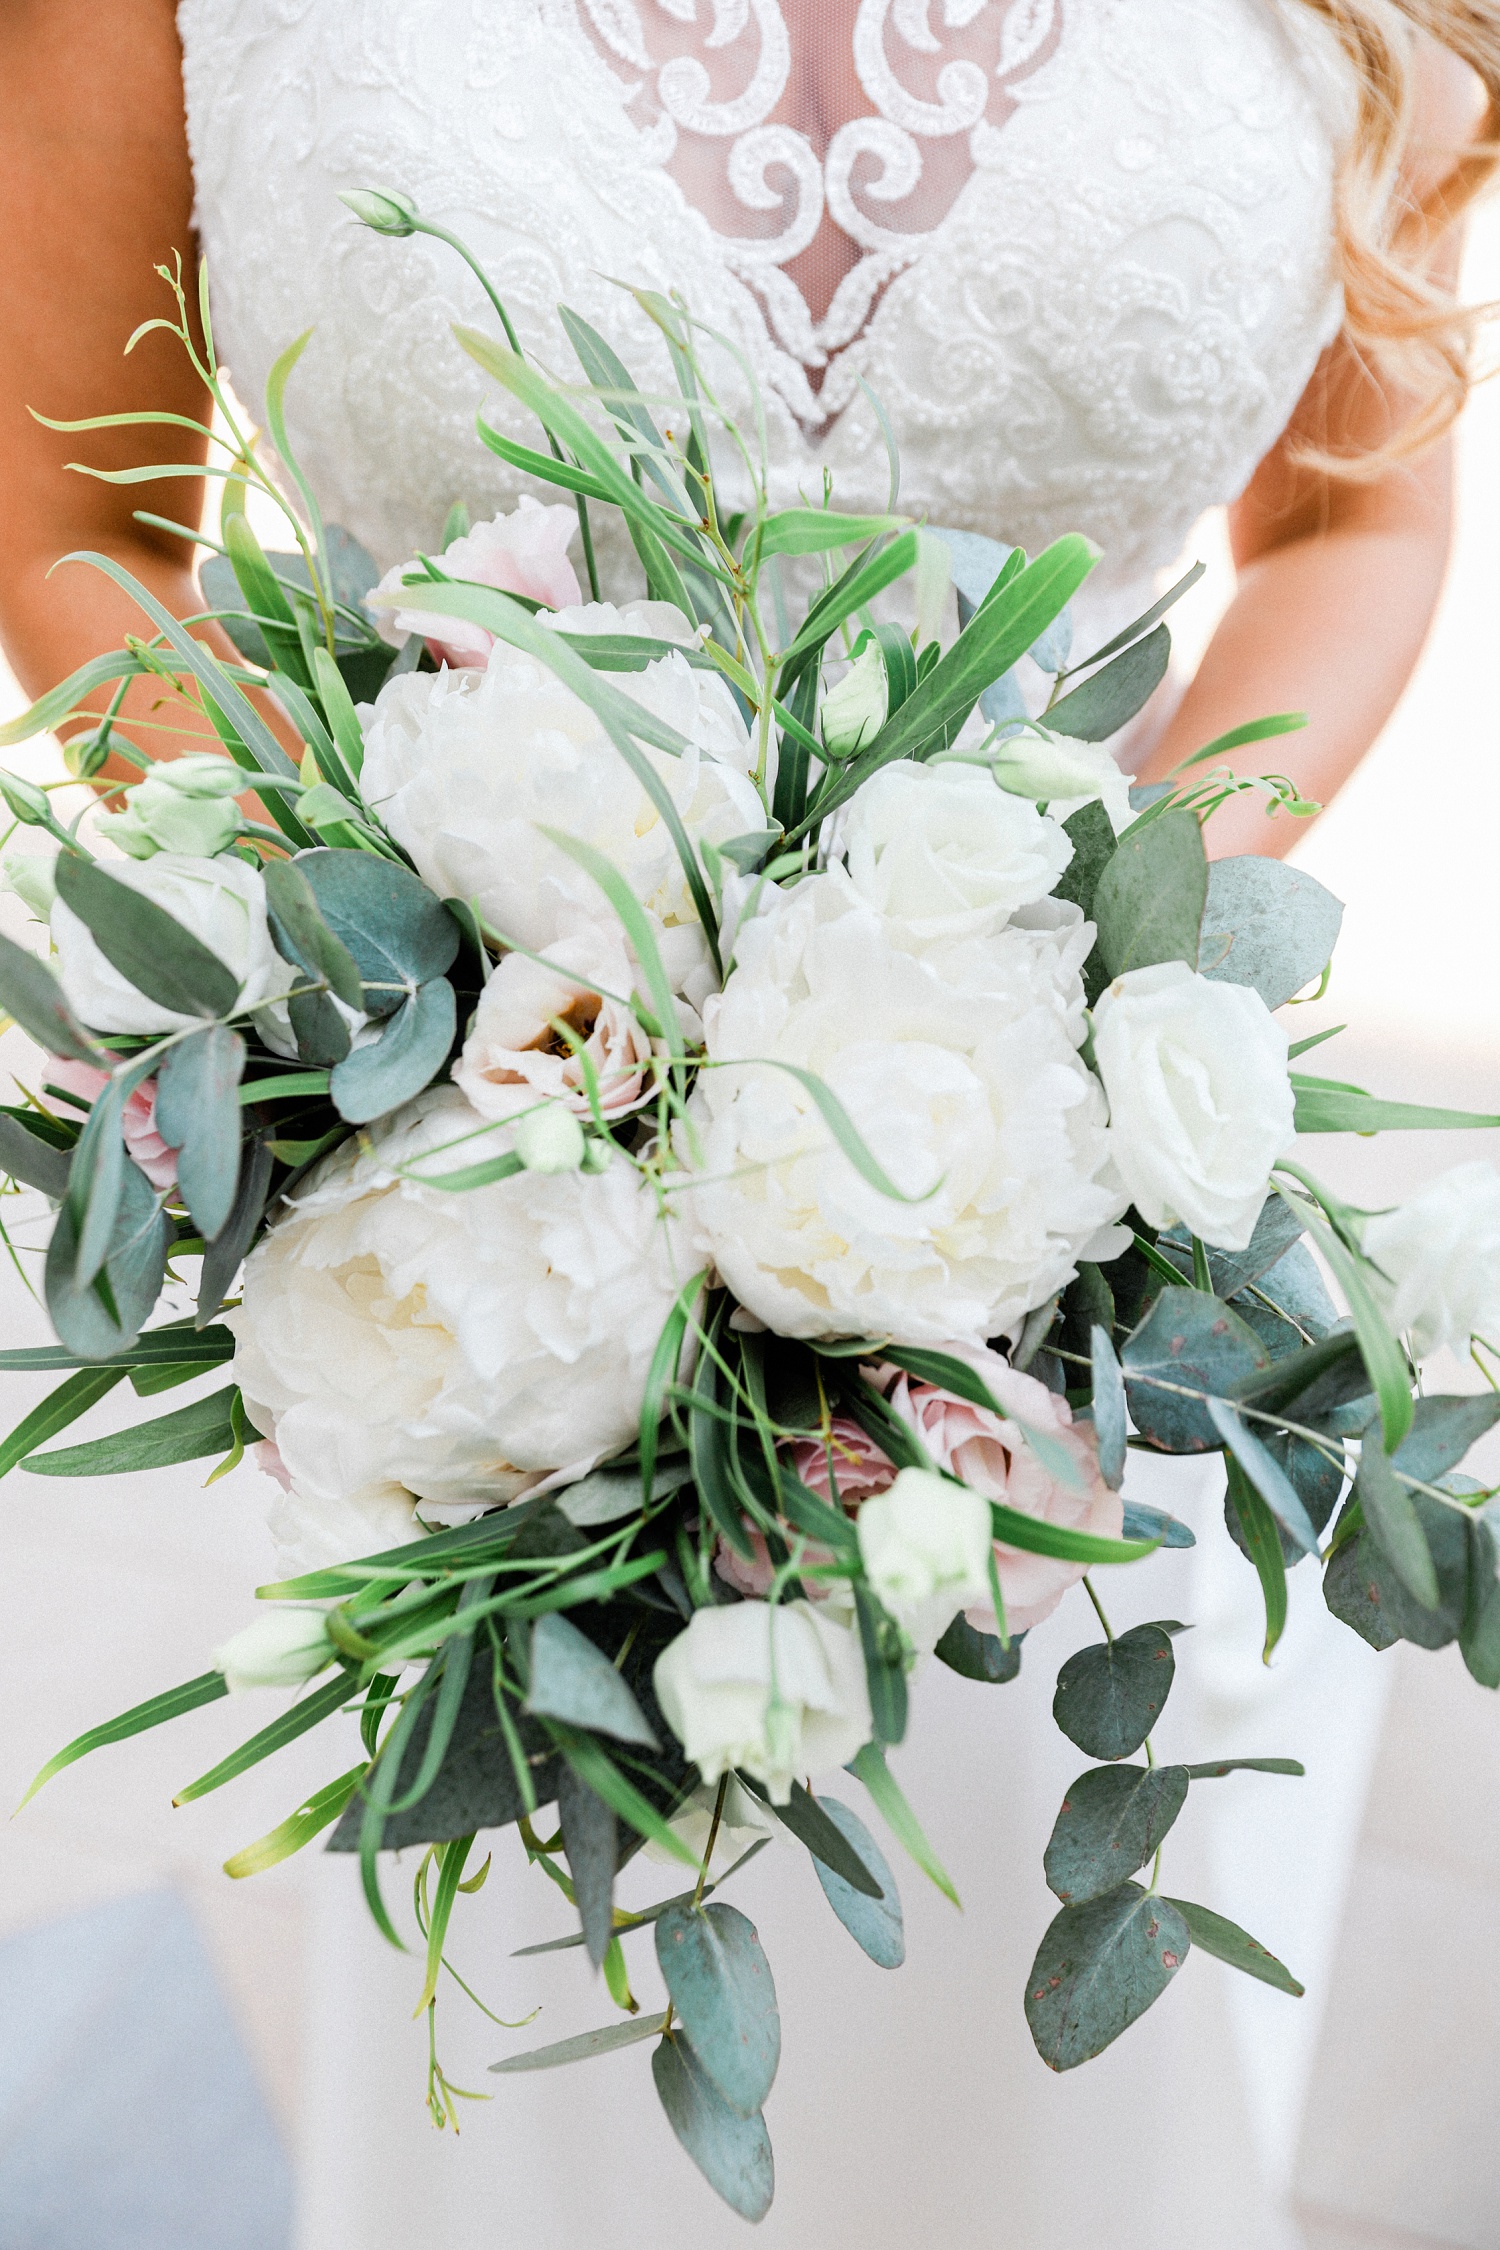 Bridal bouquet with eucalyptus and white peonies